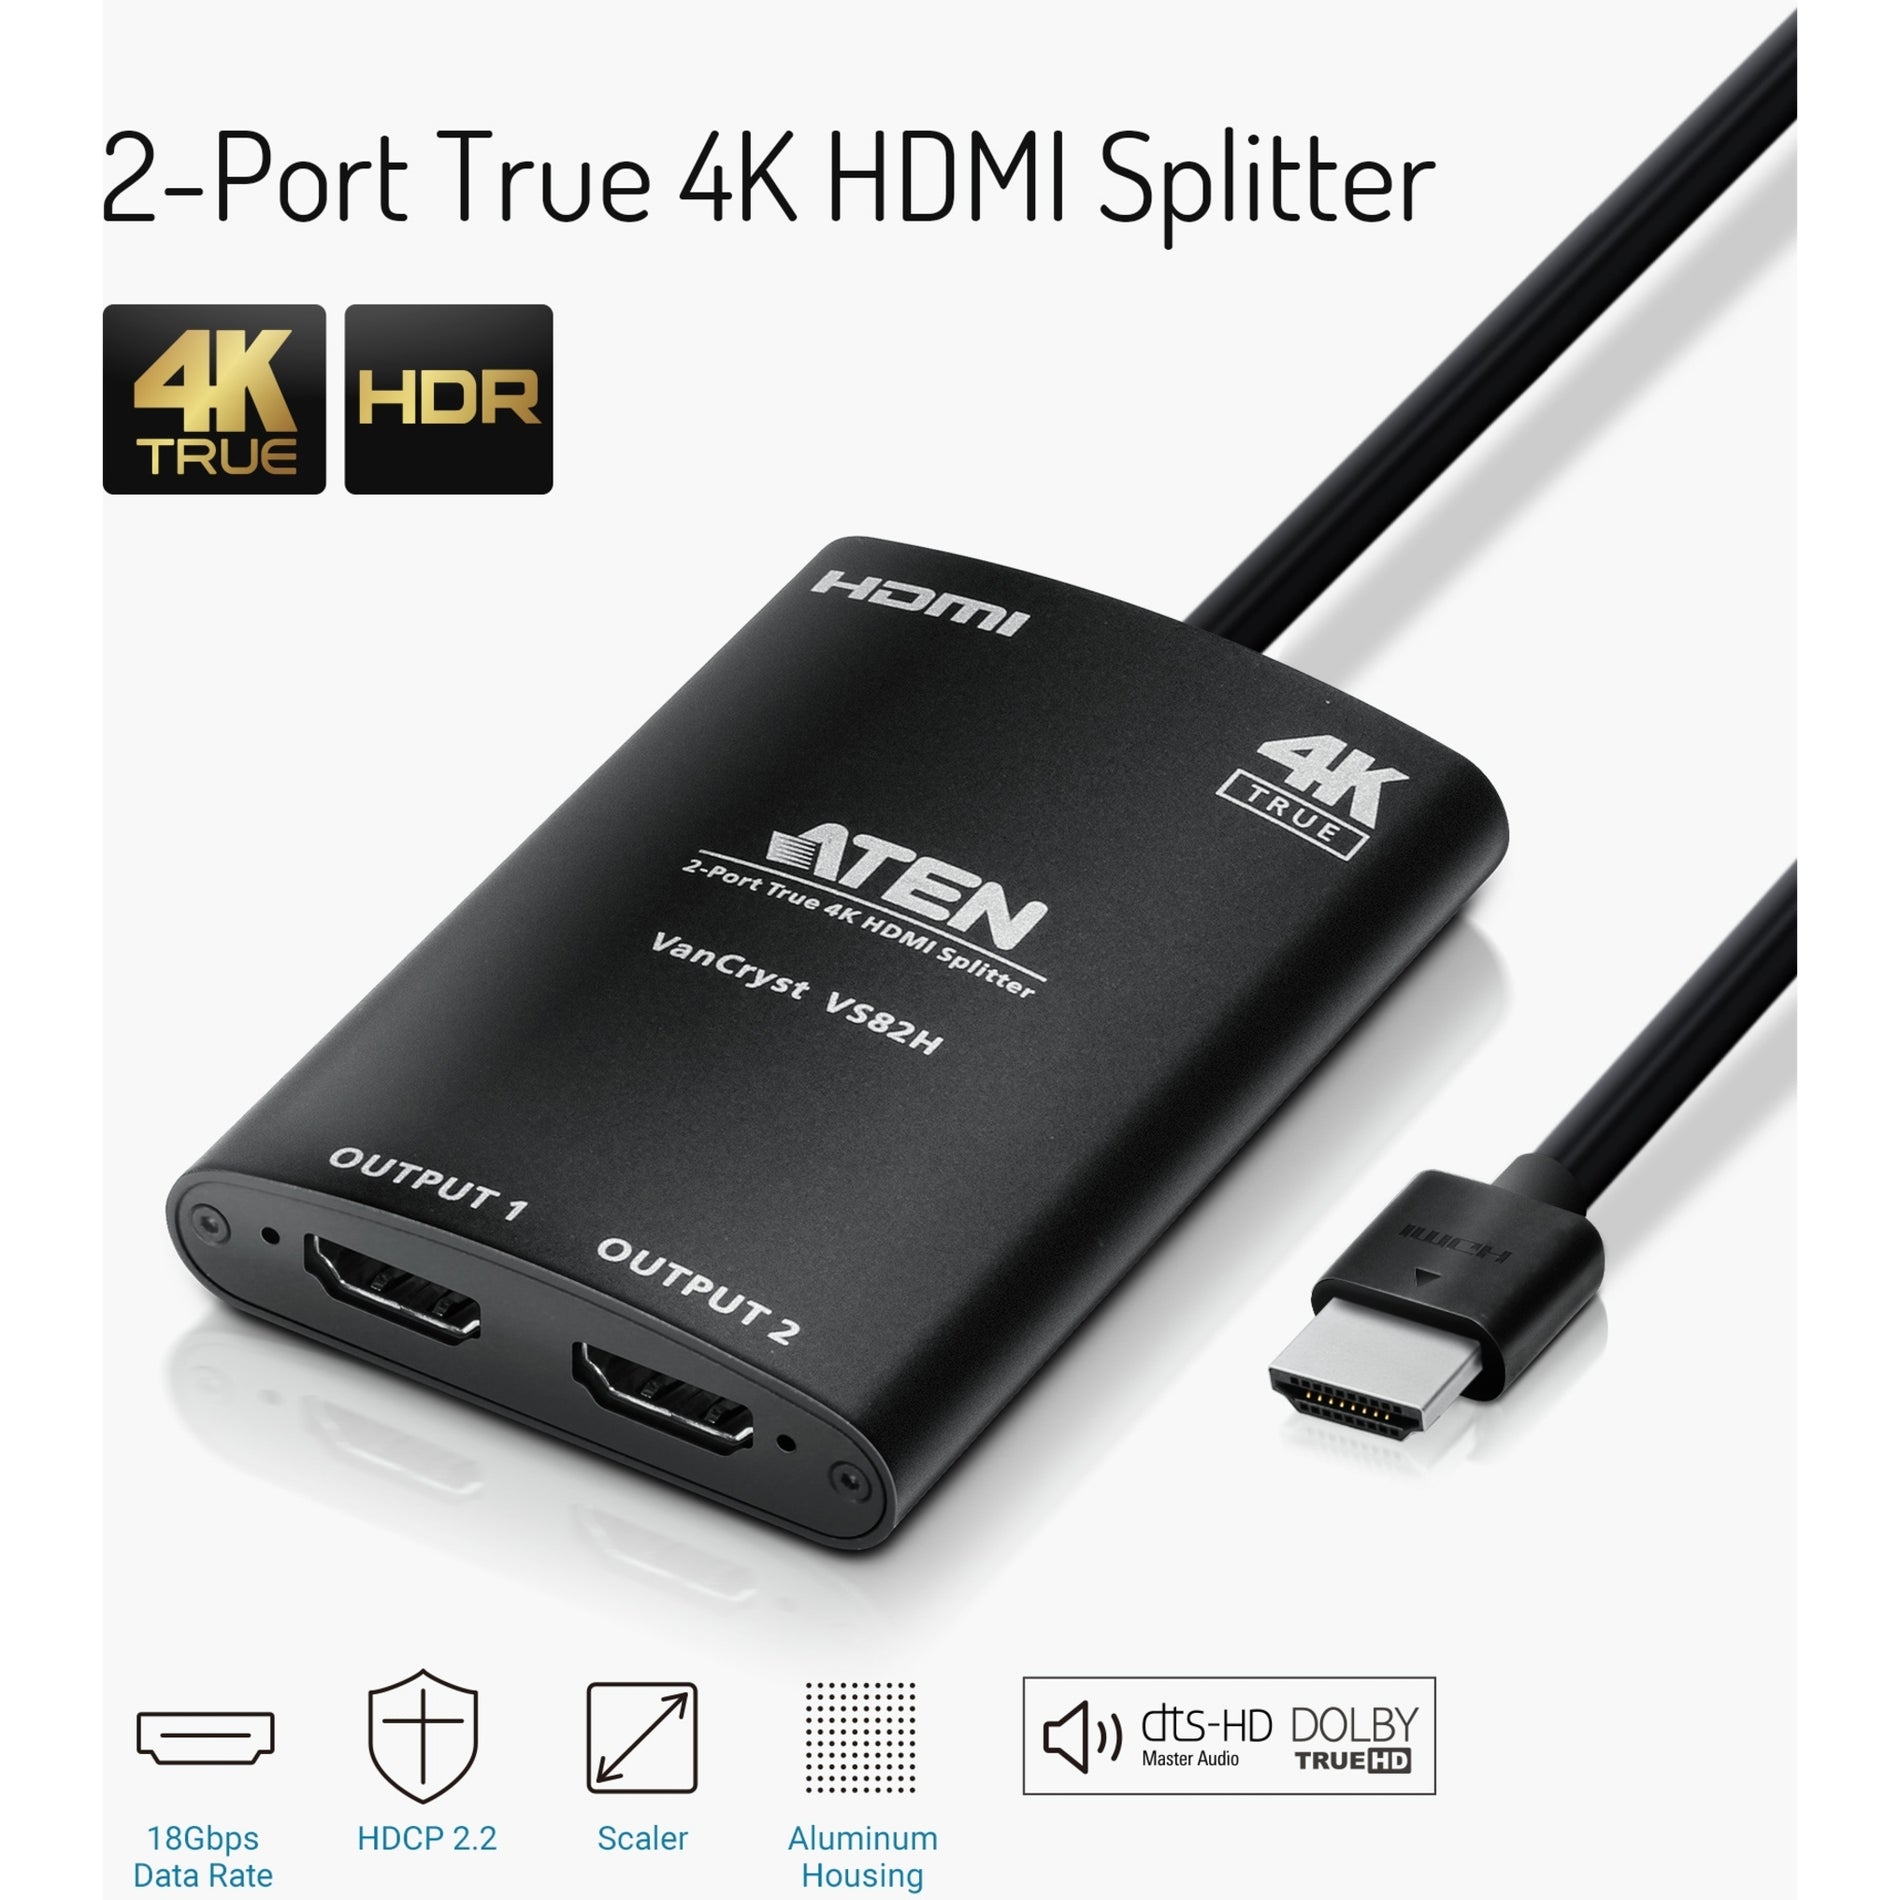 VanCryst VS82H 2-Port True 4K HDMI Splitter, Ultra HD Video Distribution for Home Theater and Gaming